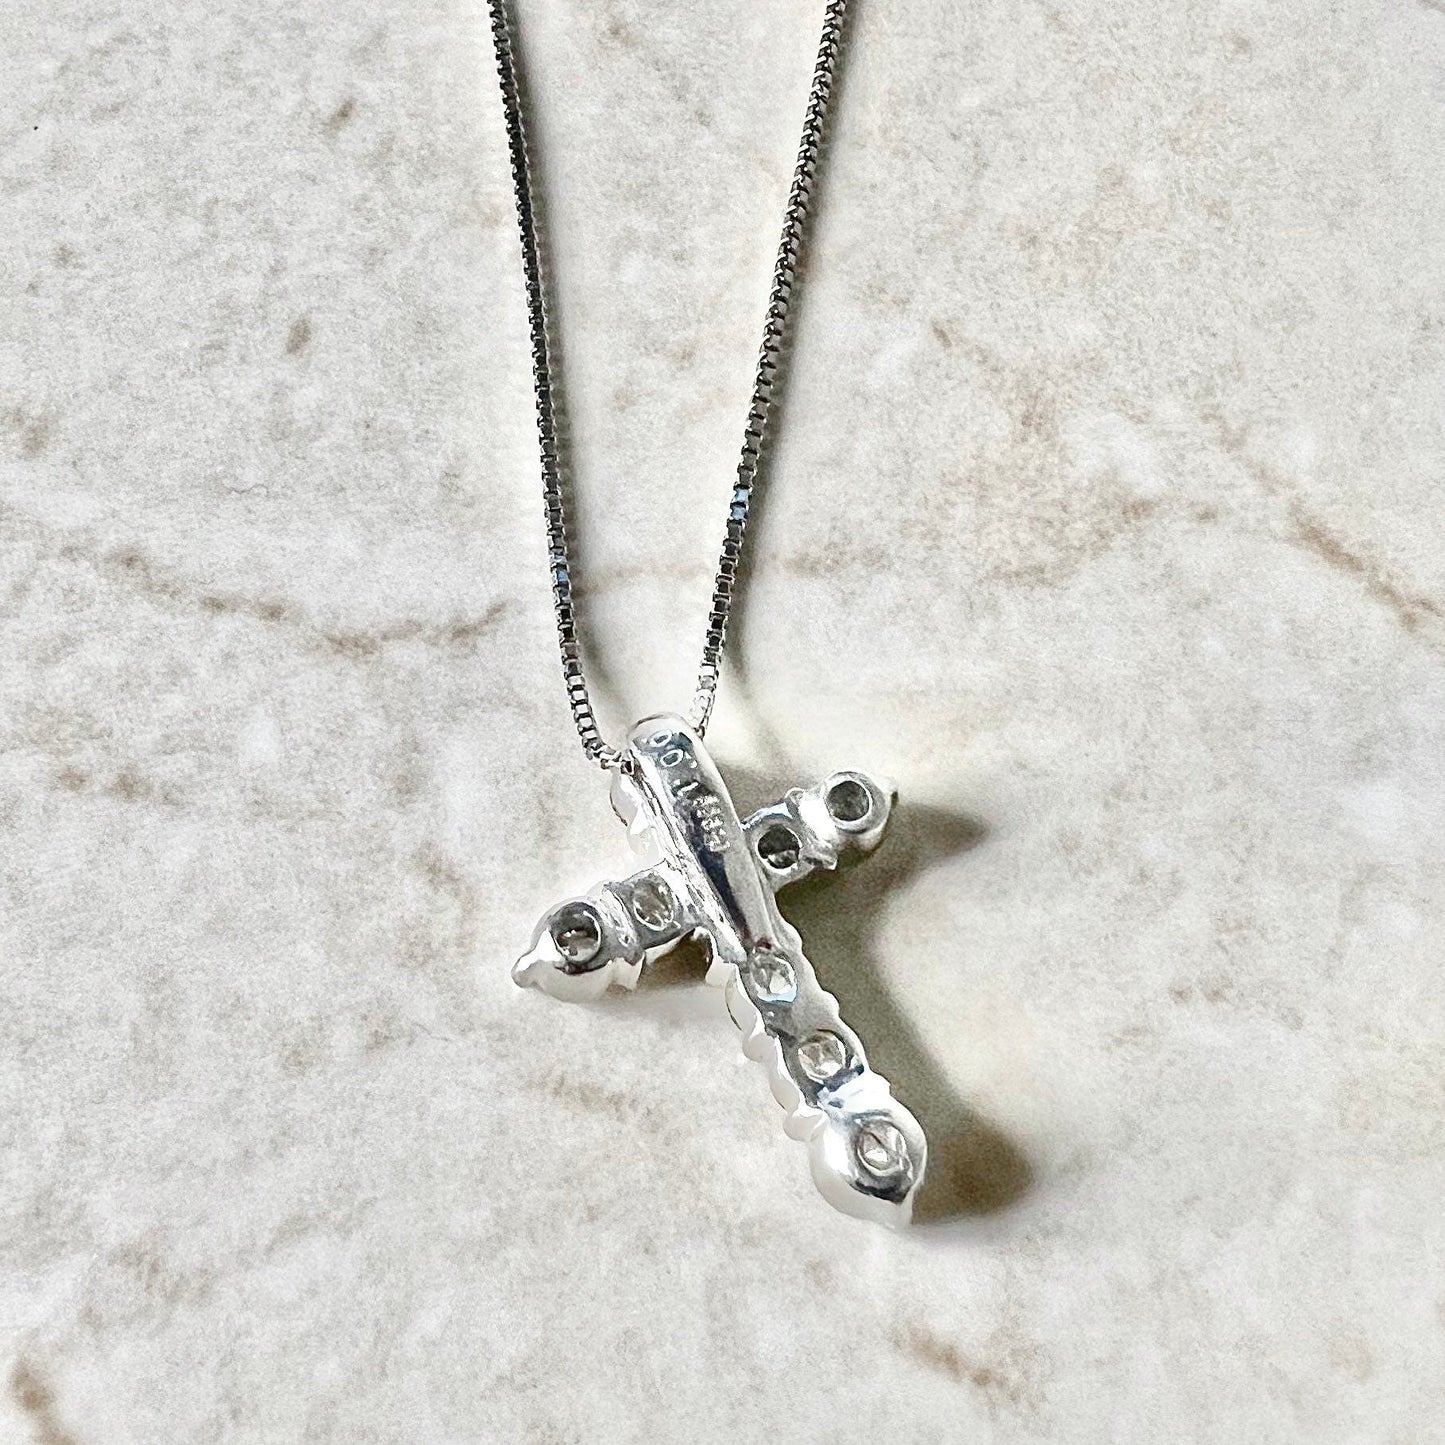 Platinum Diamond Cross Pendant Necklace 1 CTTW - Platinum Diamond Pendant - Platinum Diamond Necklace - Religious Jewelry - Gifts For Her